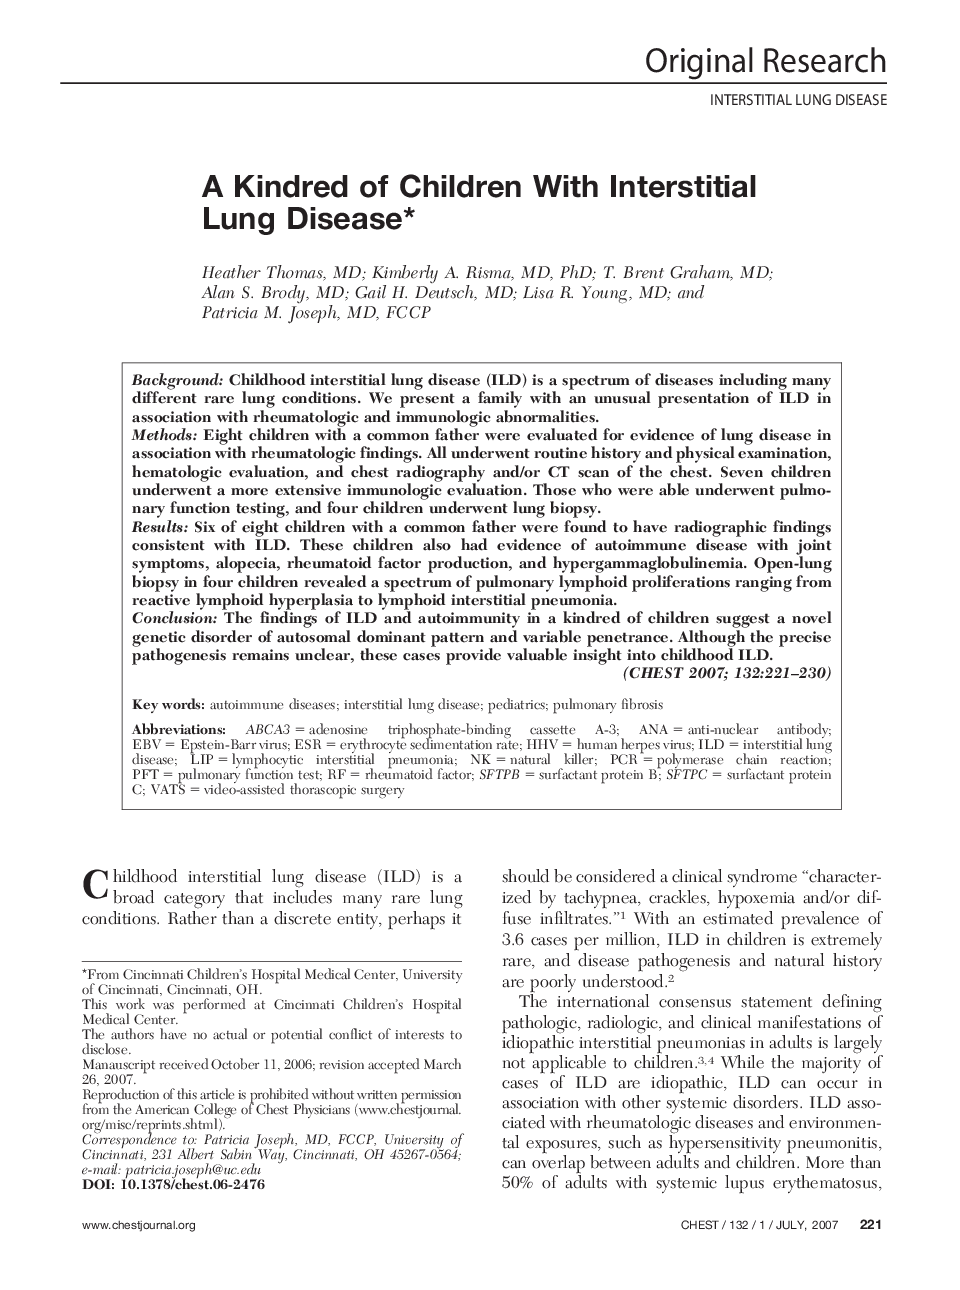 A Kindred of Children With Interstitial Lung Disease 